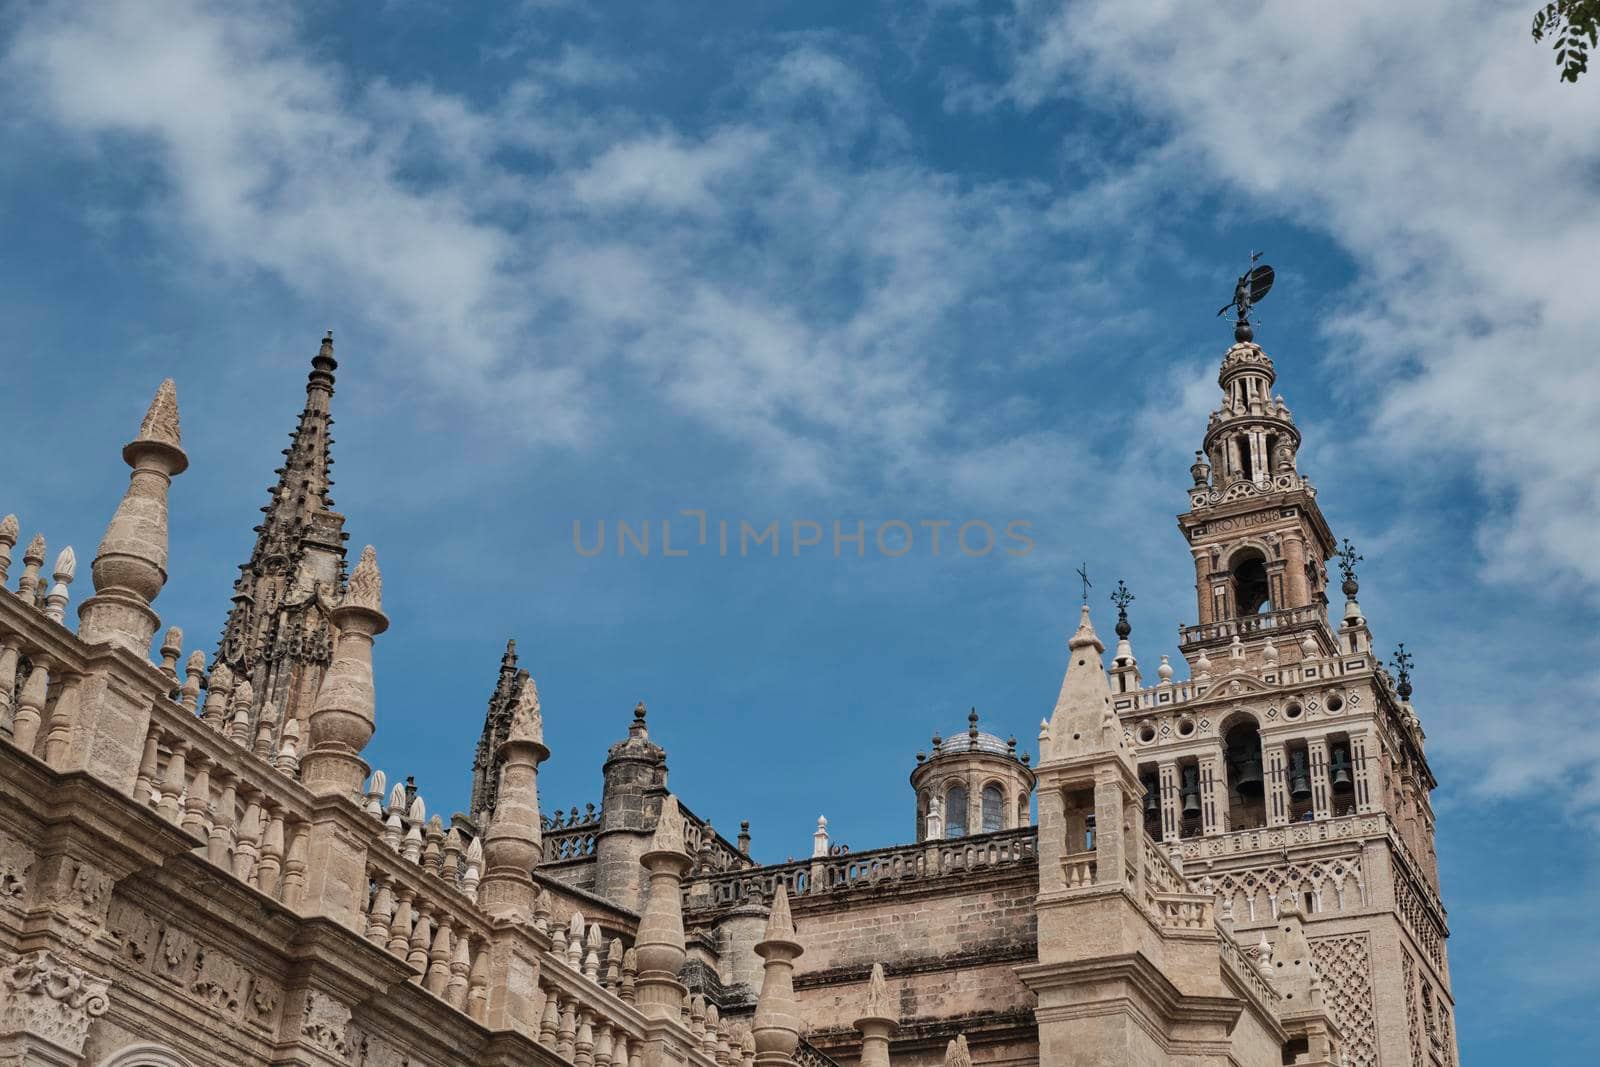 Cathedral of Saint Mary of the See (Seville Cathedral) in Seville, Andalusia, Spain in a sunny and cloudy day